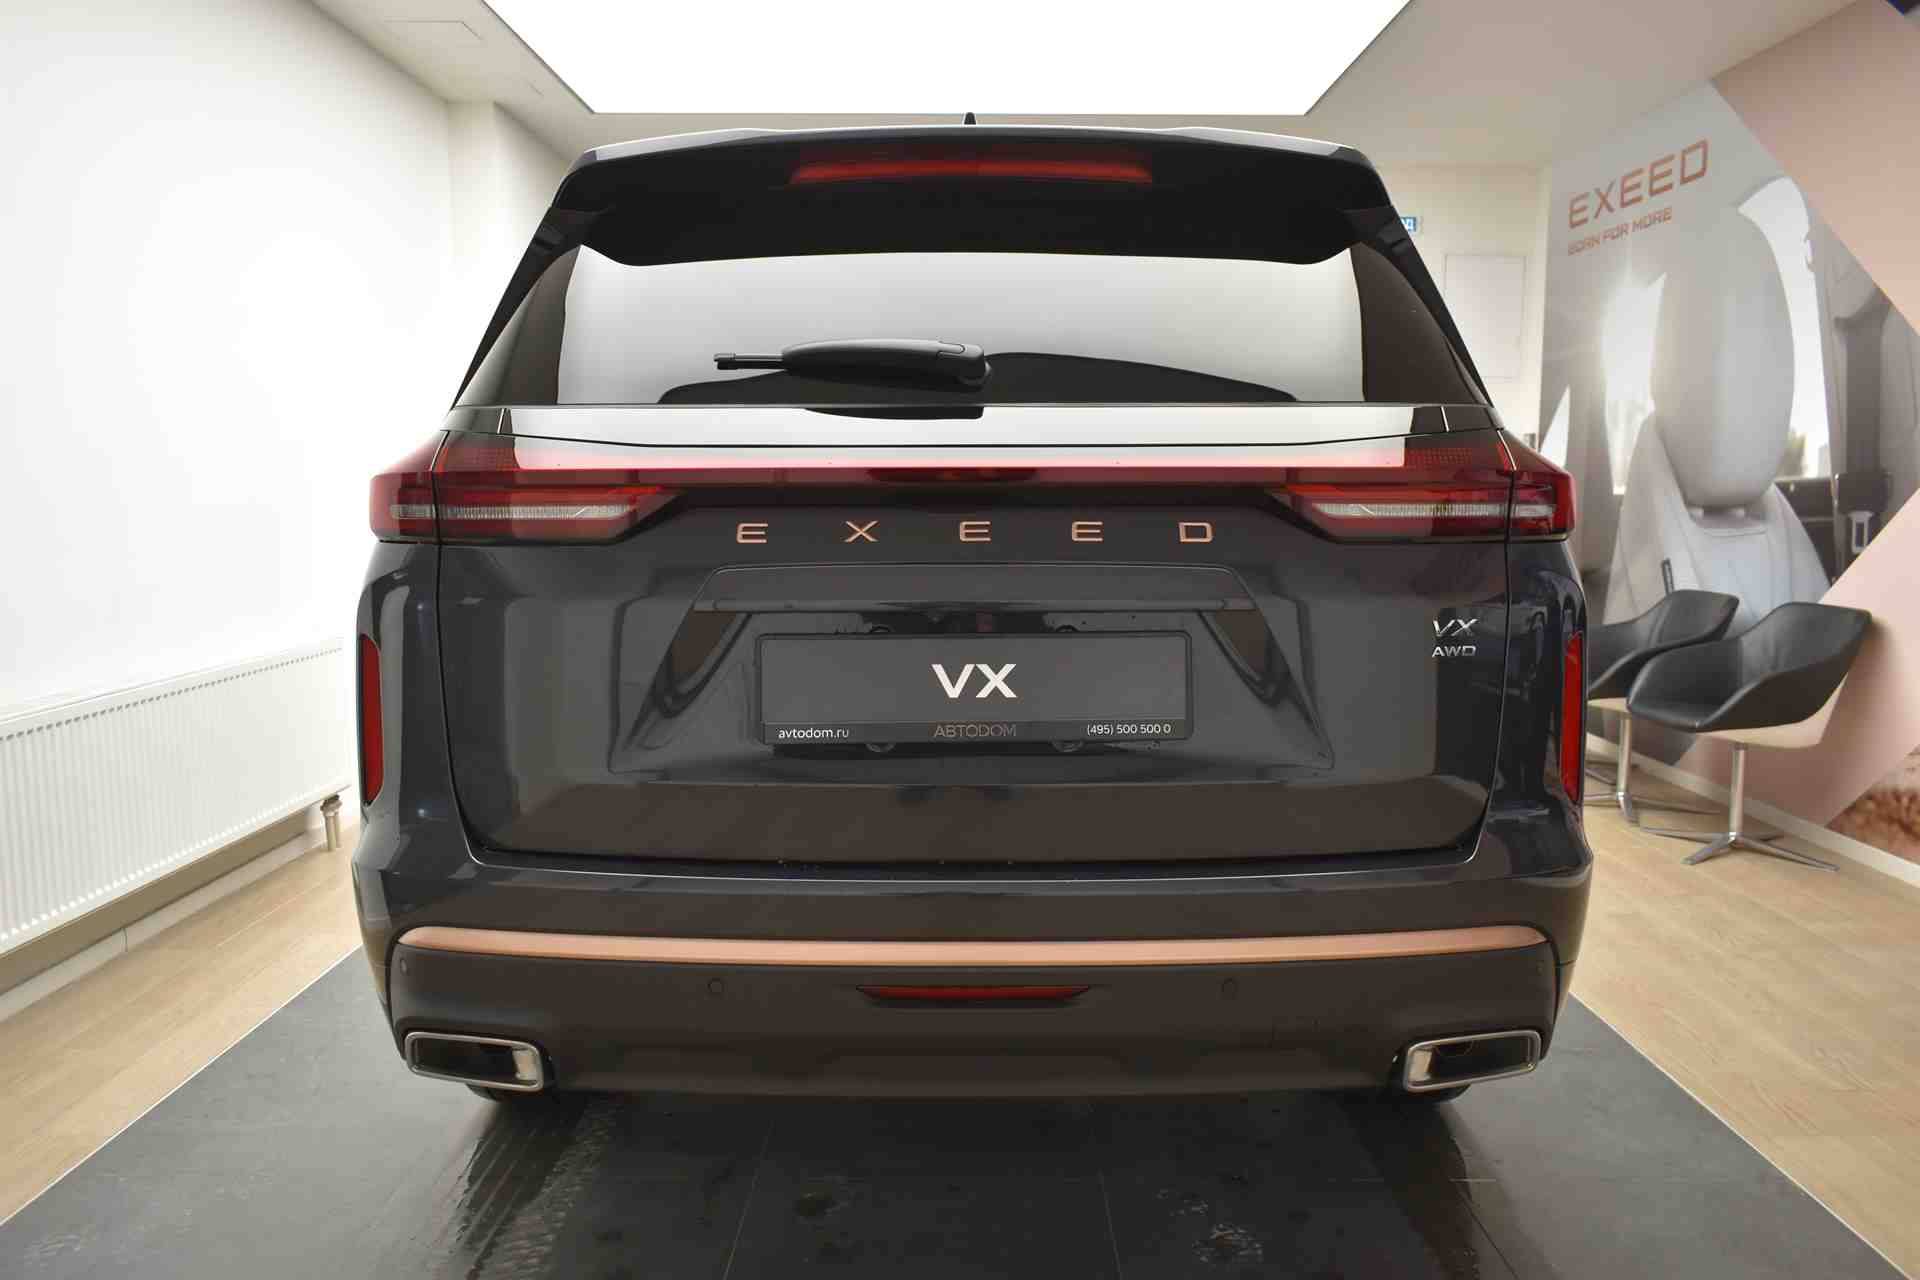 EXEED VX President LE 2.0T 7DCT 4WD